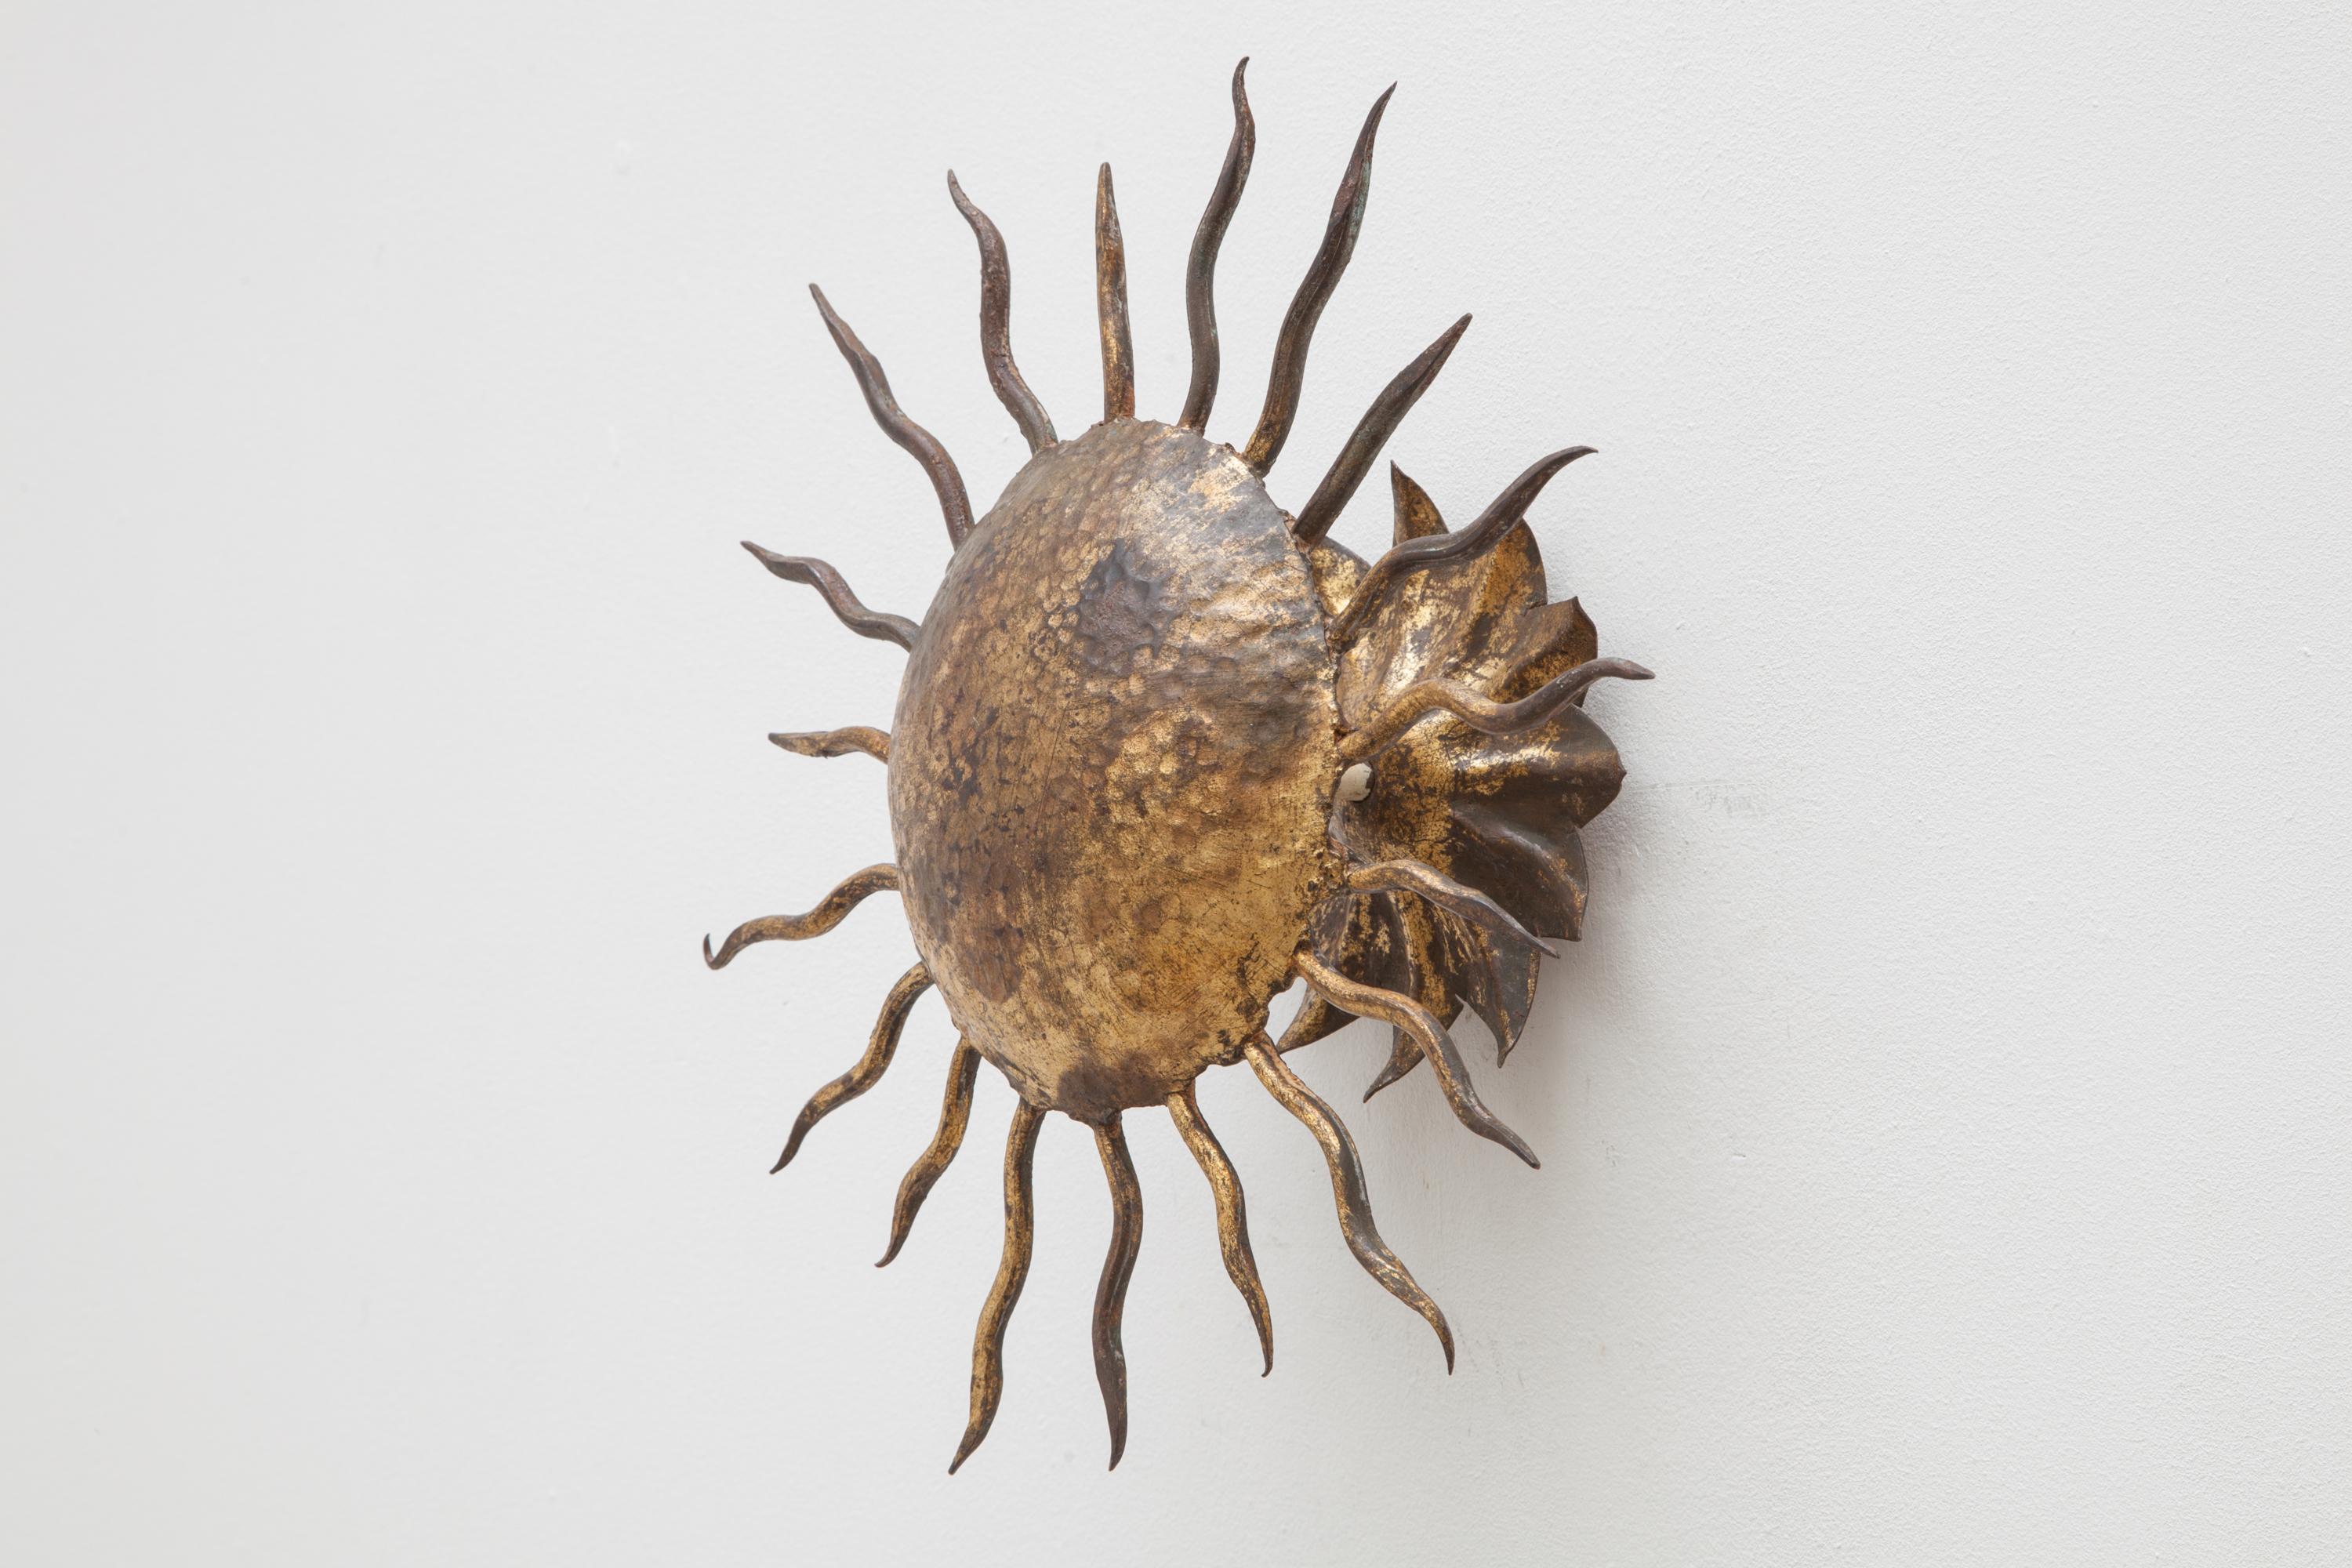 Surrealist sun a wrought iron and hammered metal face sunburst ceiling or wall light fixture, 1950s piece of craftsmanship
Lit by two bulbs will make a statement in most settings.
 